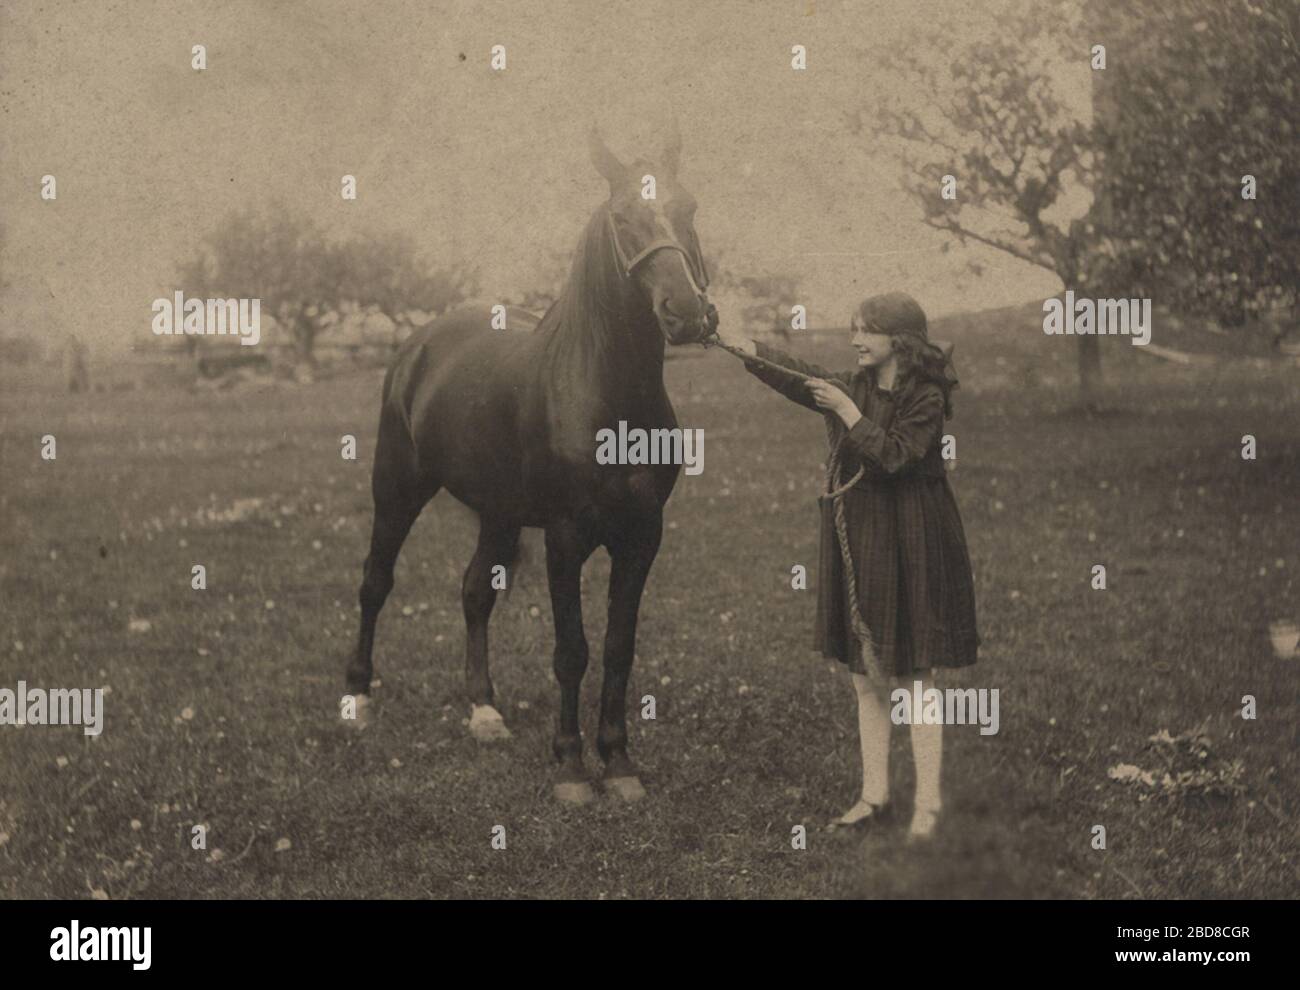 'English: Photographer: Reuben R. Sallows (1855 - 1937) Description:  Young girl stands, facing left, holding lead of a horse. Girl wears knee-length dark dress, white tights, black shoes; long hair tied back with large bow. Horse has white blaze and markings at rear hooves. Tree at right of frame and in upper left quadrant. Sallow imprint in lower right corner of matte. Object ID : 0477-rrs-ogohc-ph  Order a higher-quality version of this item by contacting the Huron County Museum (fee applies).; 15 August 2014, 12:47:53; https://www.flickr.com/photos/124448282@N08/16879735086/; Huron County Stock Photo